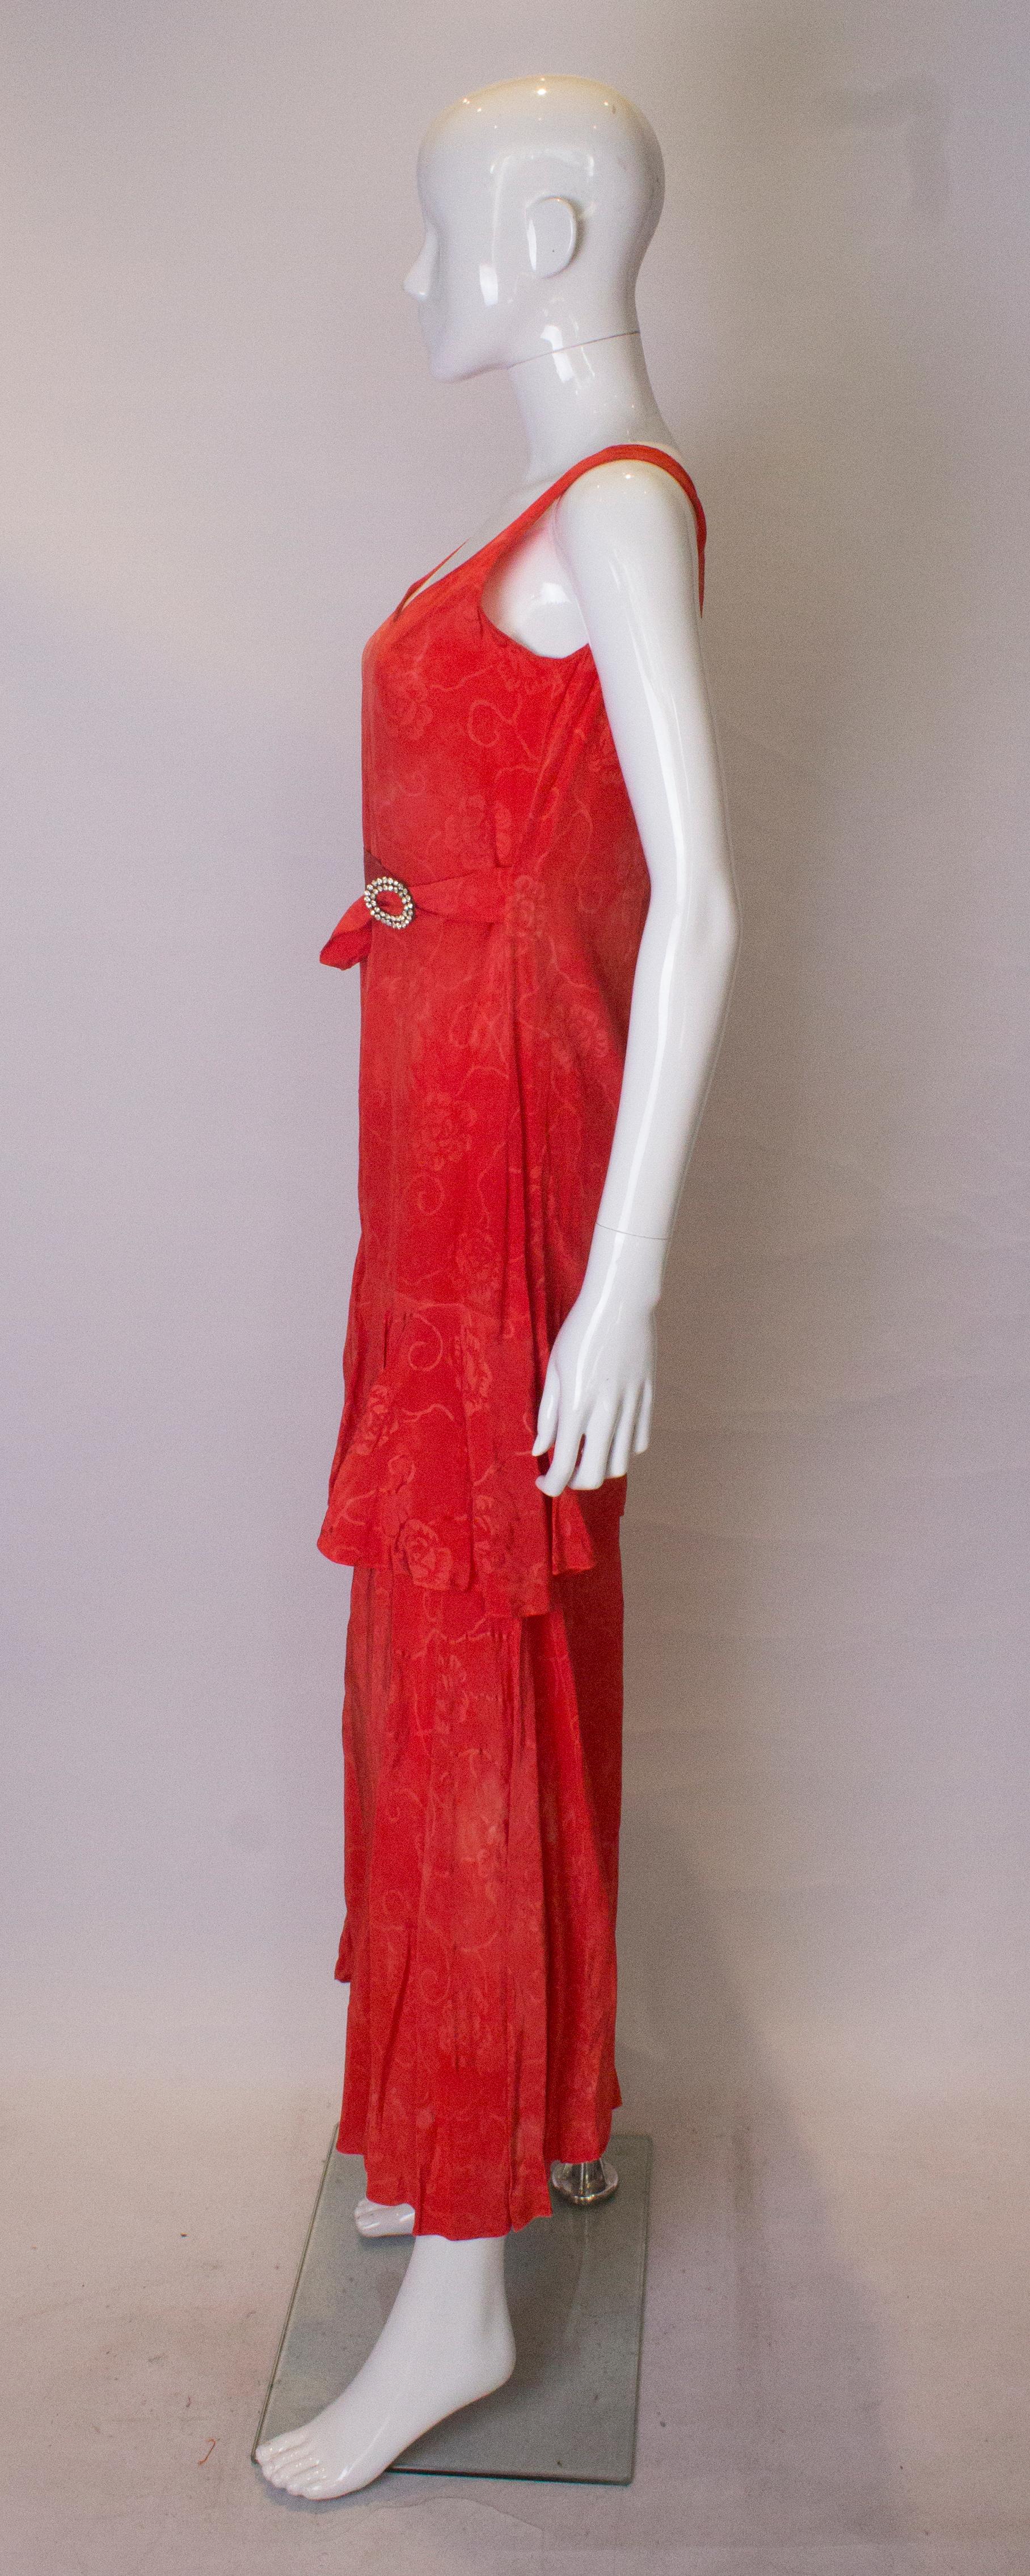 1920s style formal dresses